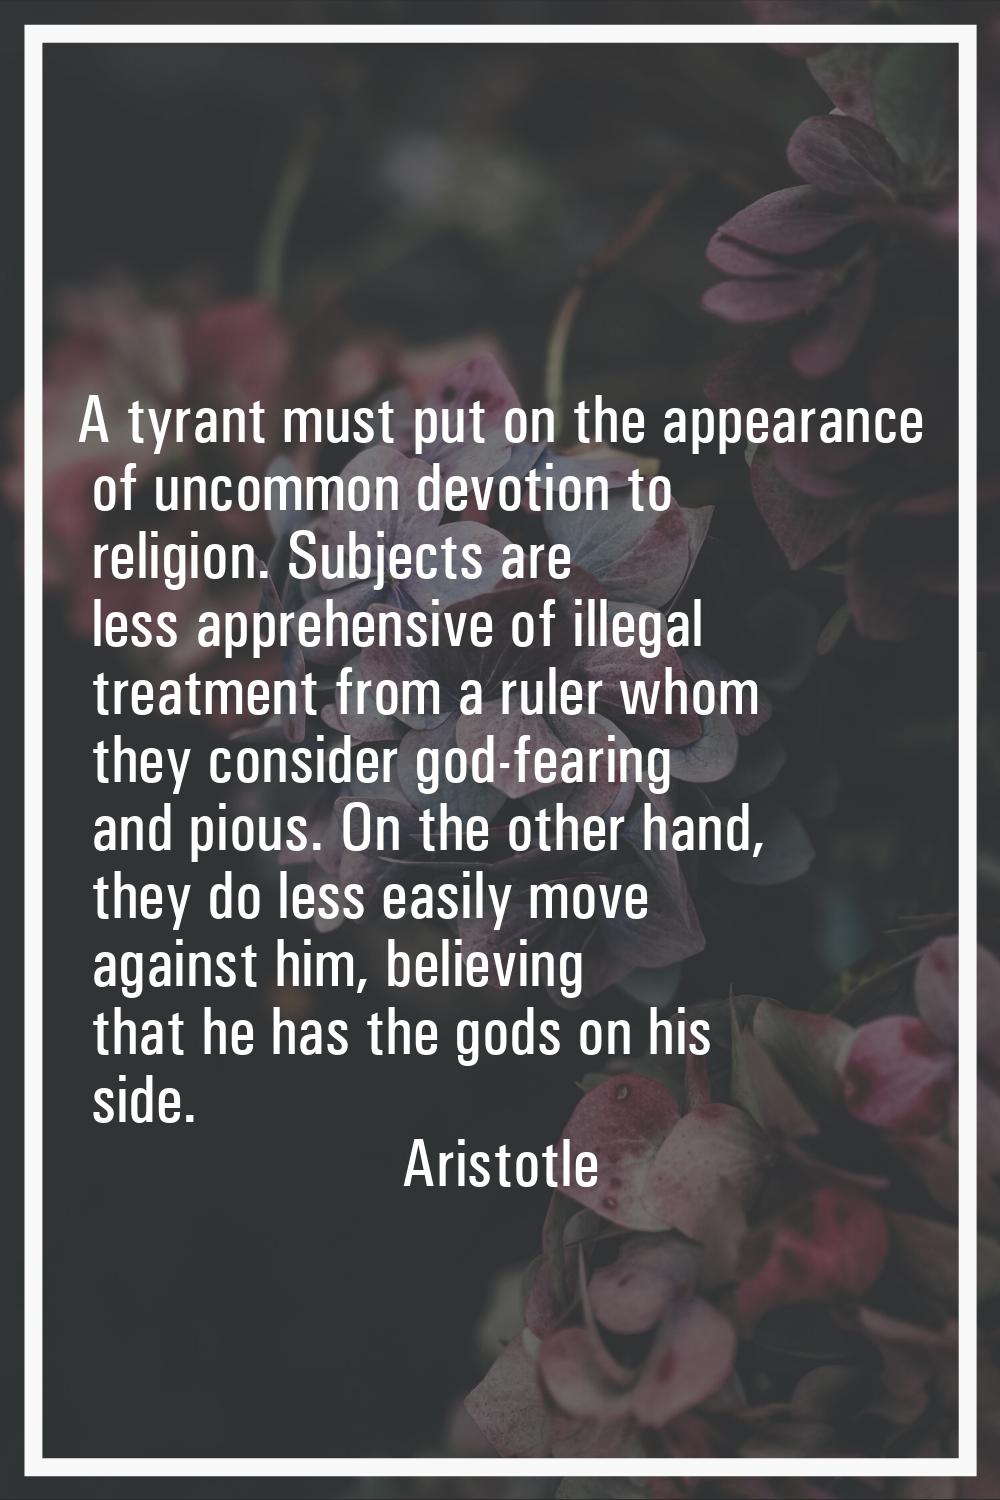 A tyrant must put on the appearance of uncommon devotion to religion. Subjects are less apprehensiv